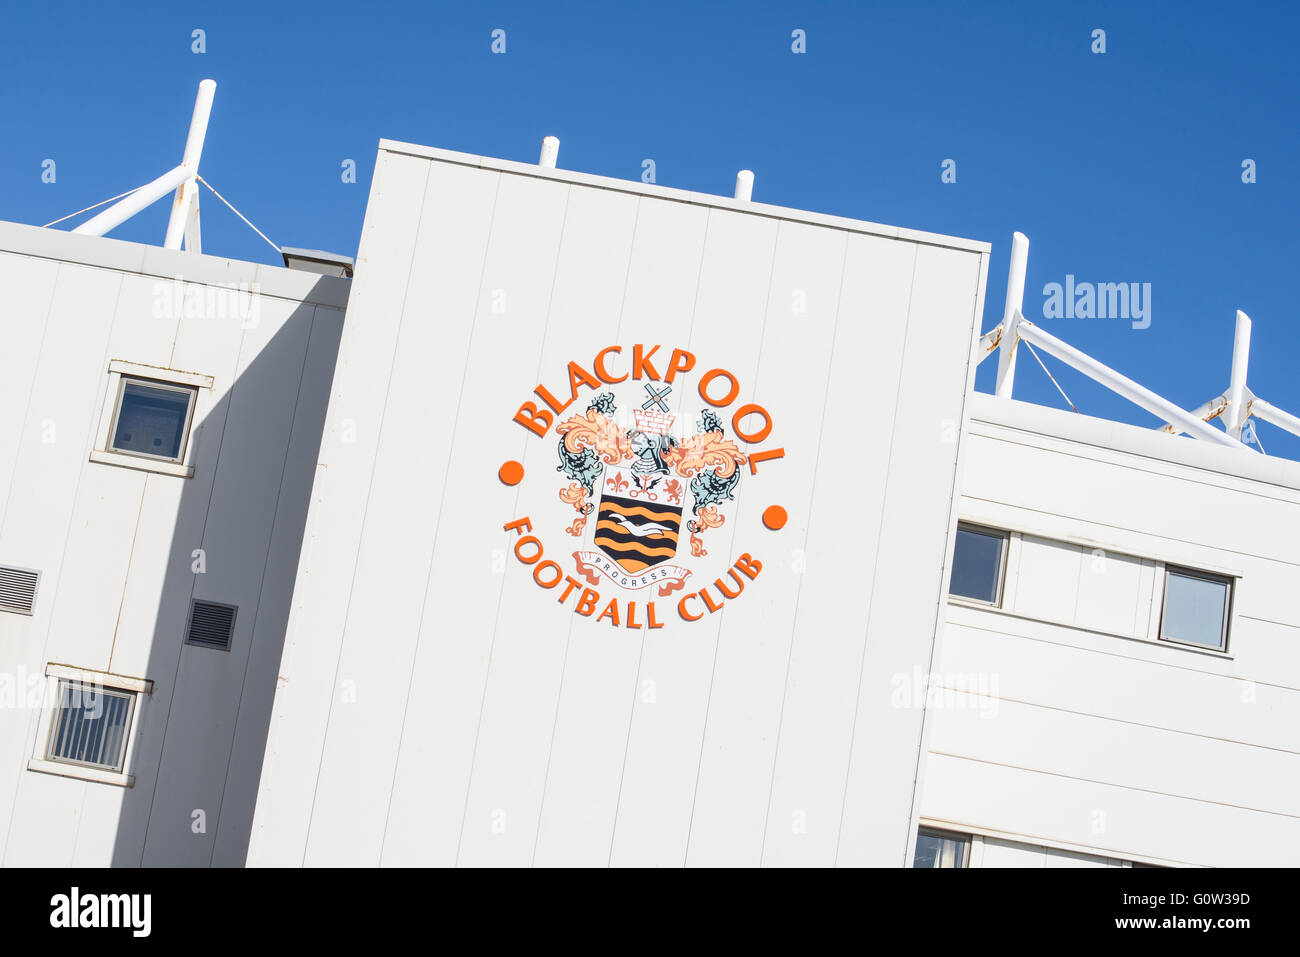 Blackpool Football Club main building showing the club name and emblem, photographed against a blue sky Stock Photo